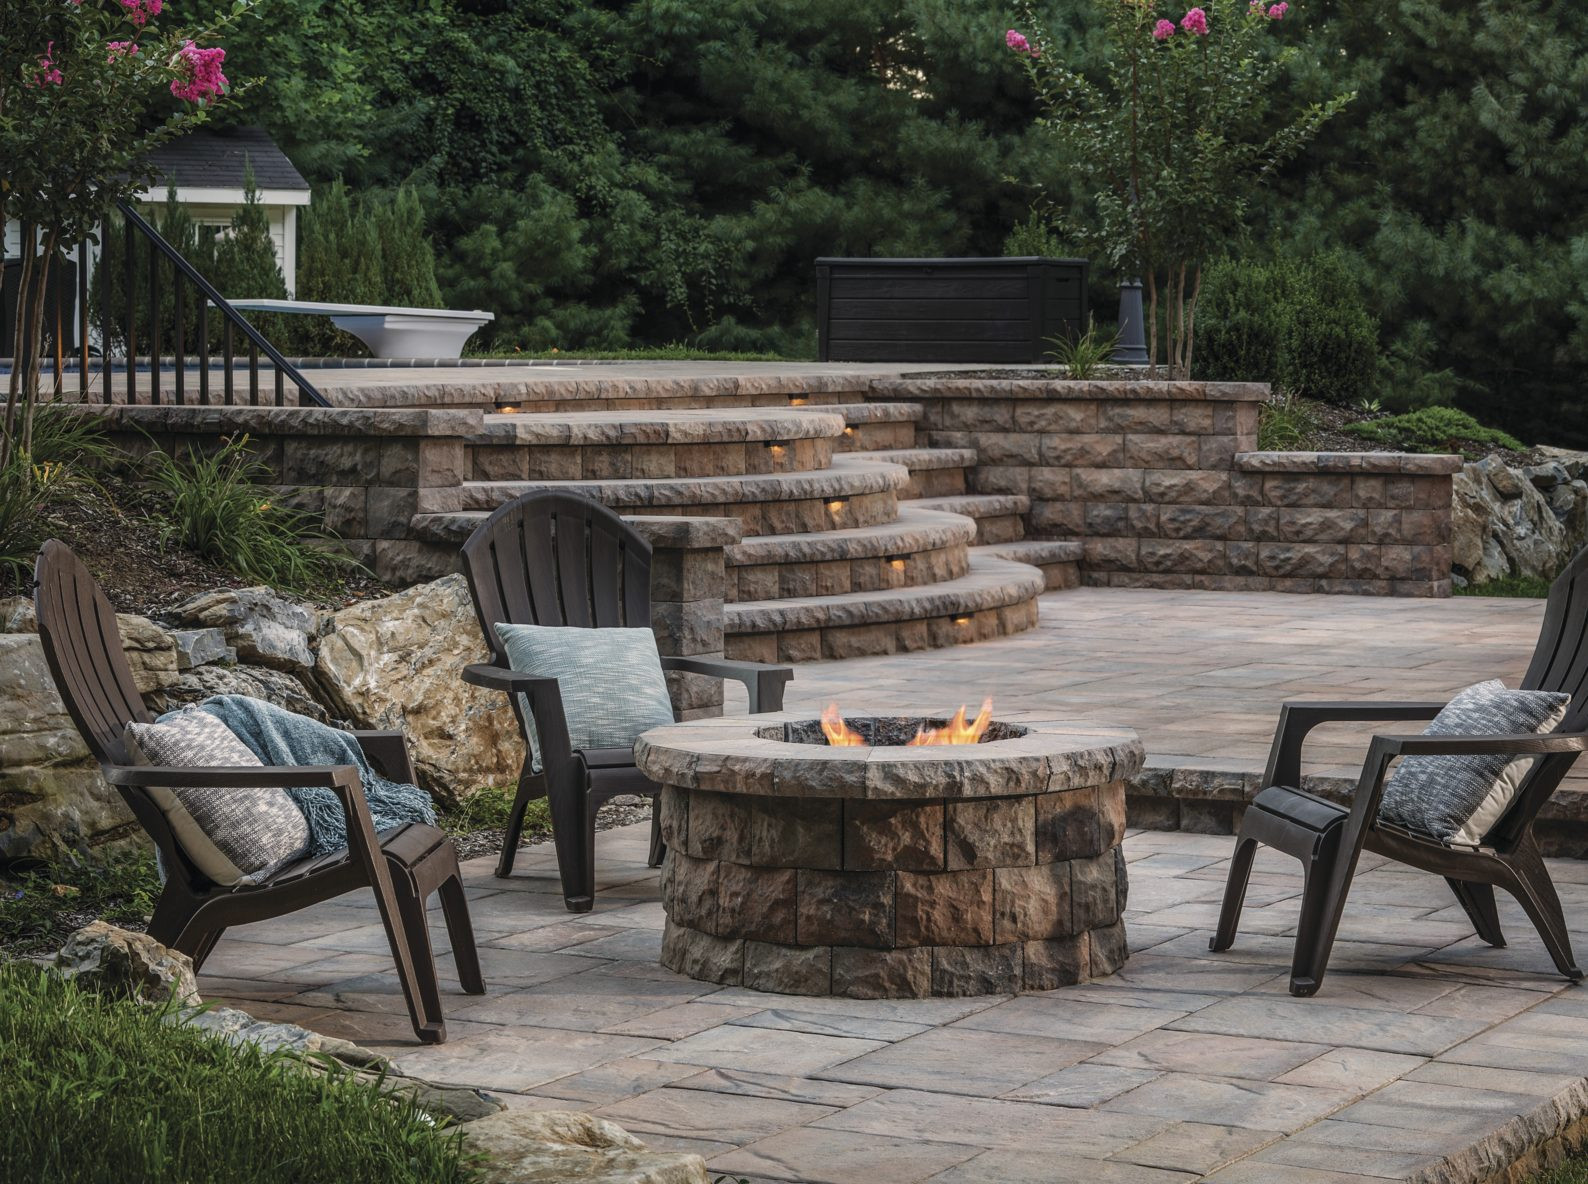 Outdoor Patio Fire Pit Ideas
 Turn Up the Heat with These Cozy Fire Pit Patio Design